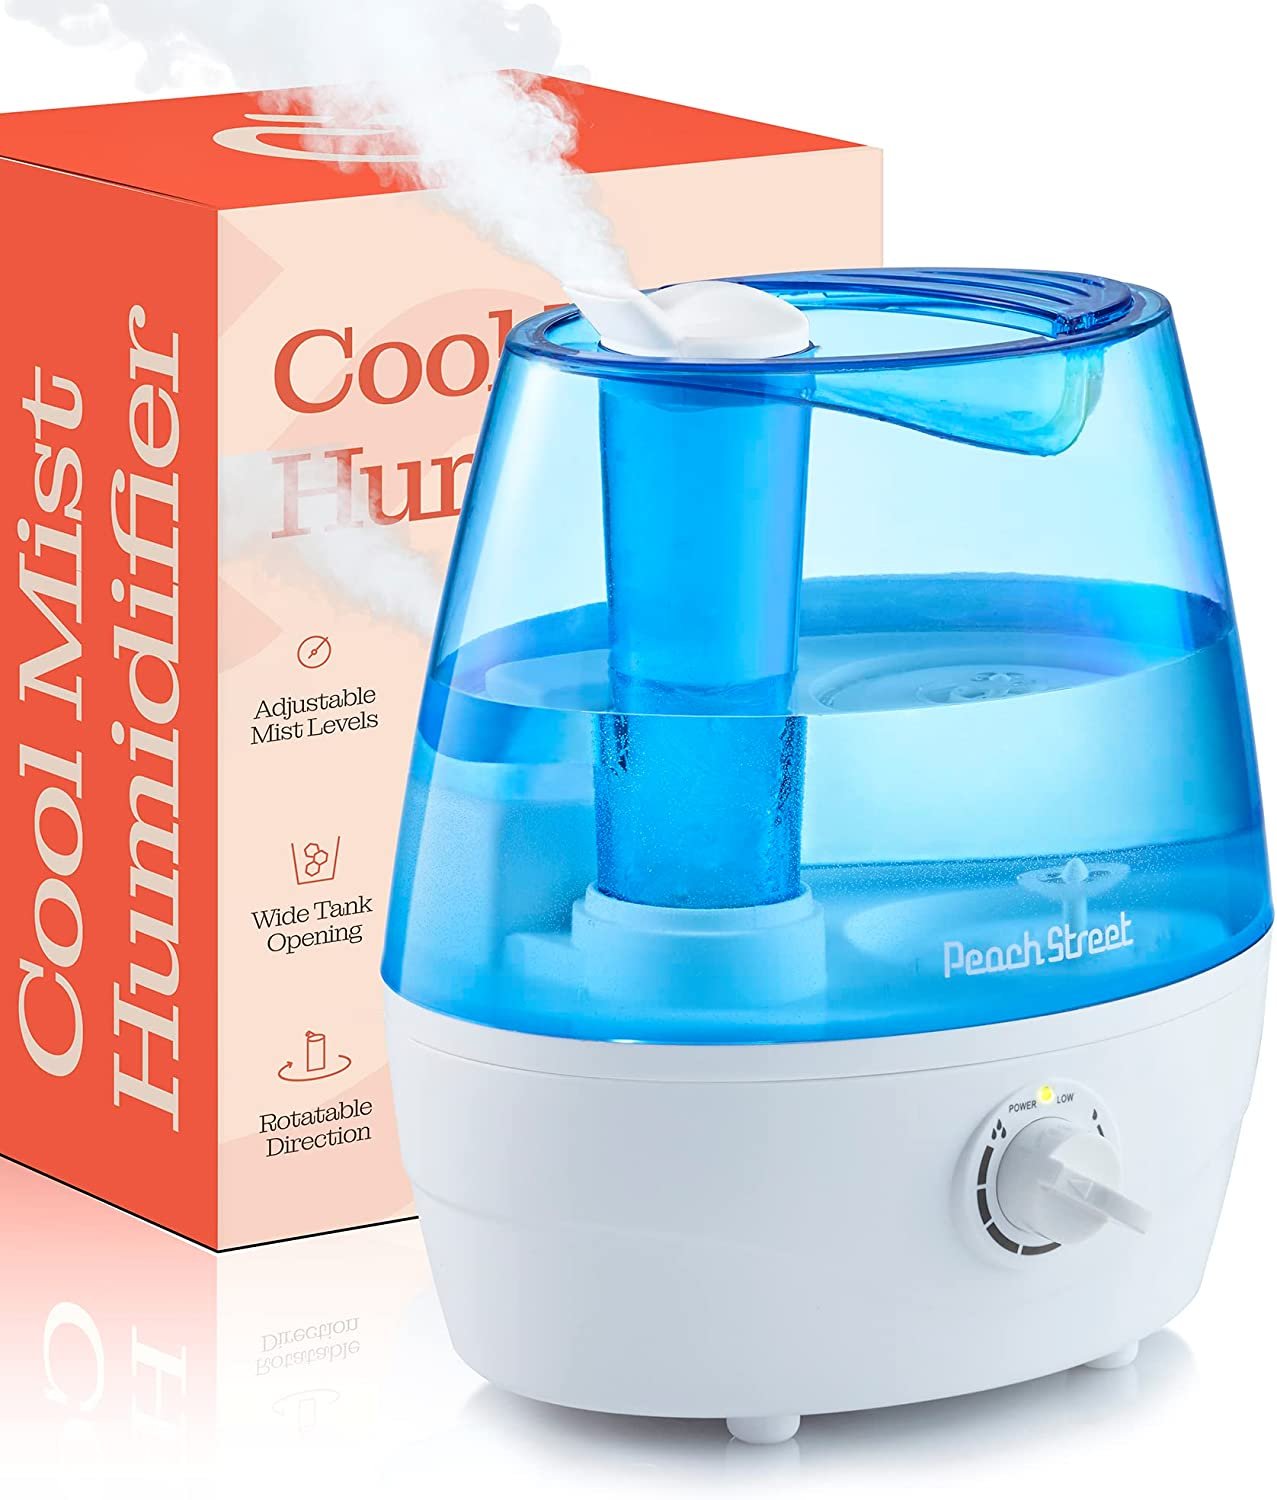 Cool Mist Humidifier - 2.2L Water Tank, for Bedroom, Baby, Quiet Ultrasonic Air Vaporizer, Adjustable Mist Level, 360 Nozzle Rotation, Auto-Shut Off, Large Area Humidifiers Easy Fill and Clean